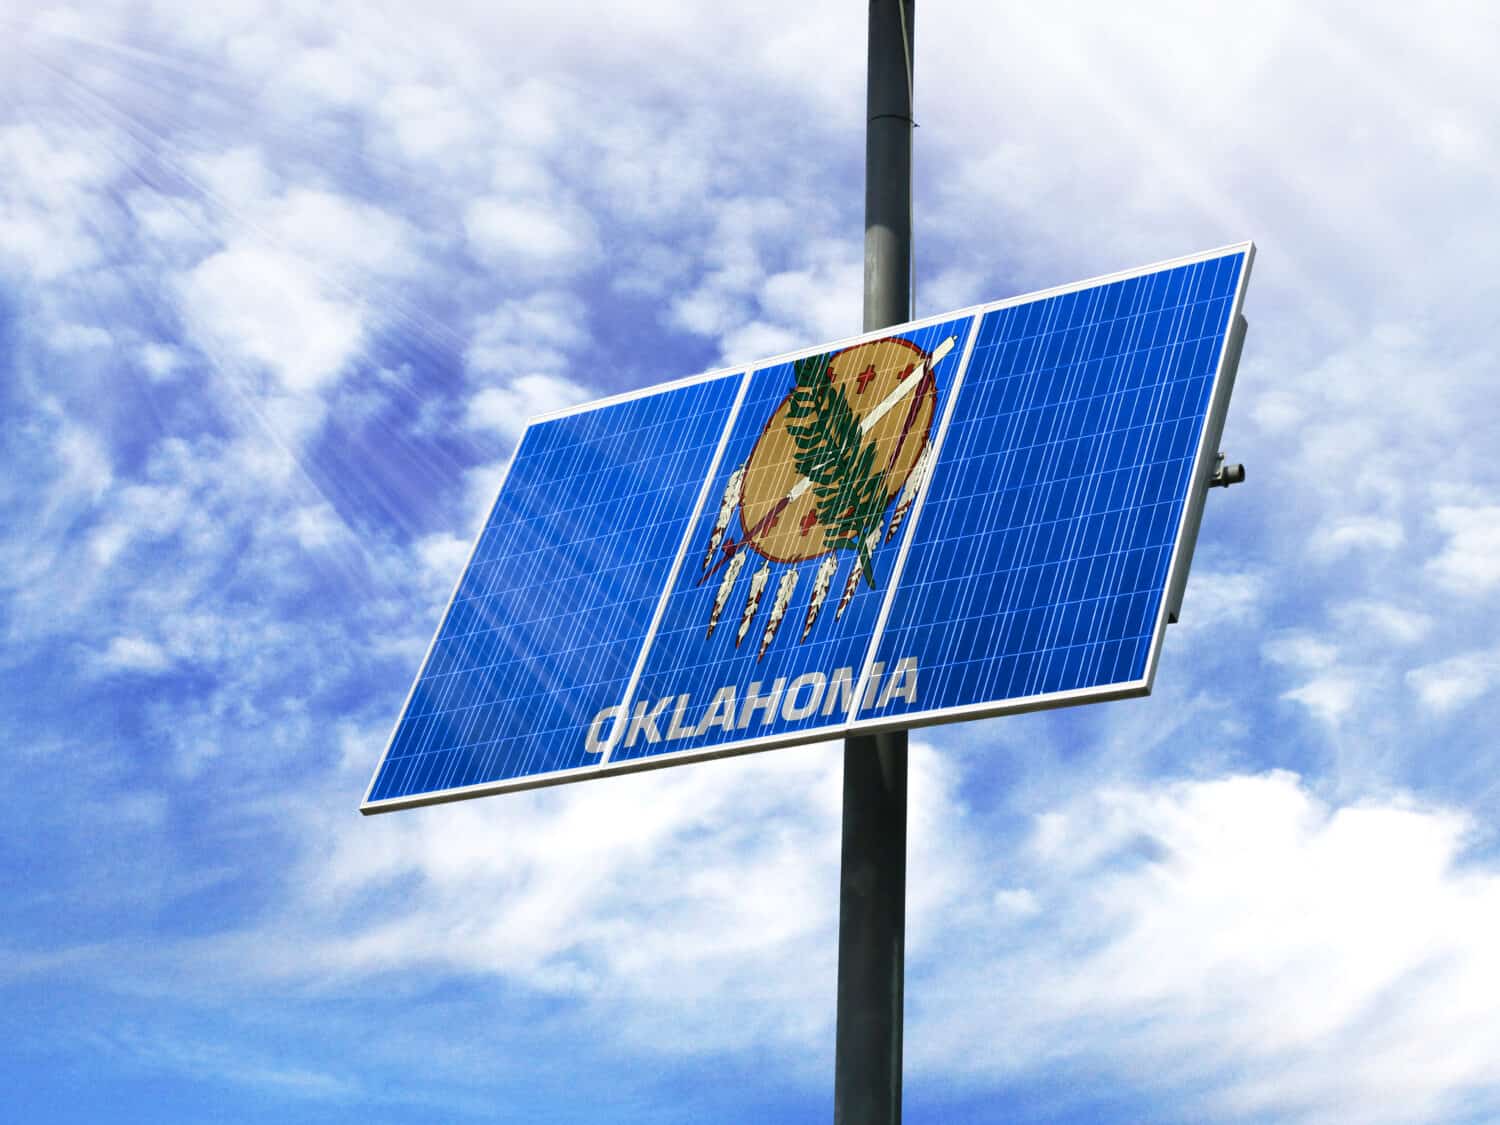 Solar panels against a blue sky with a picture of the flag State of Oklahoma